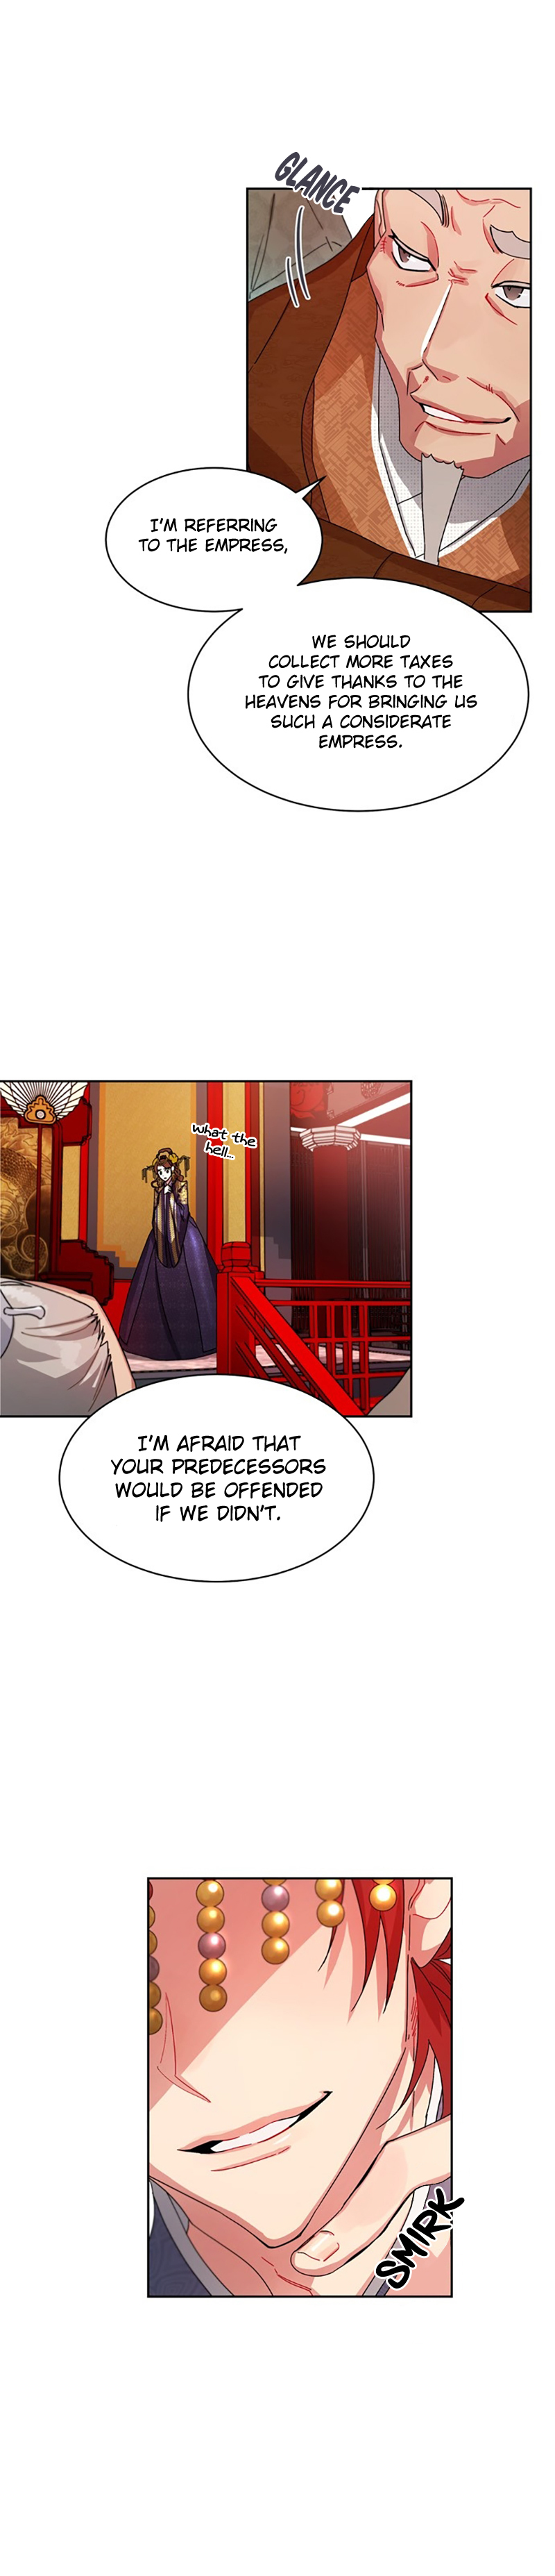 What Kind of Empress Is This ch.12